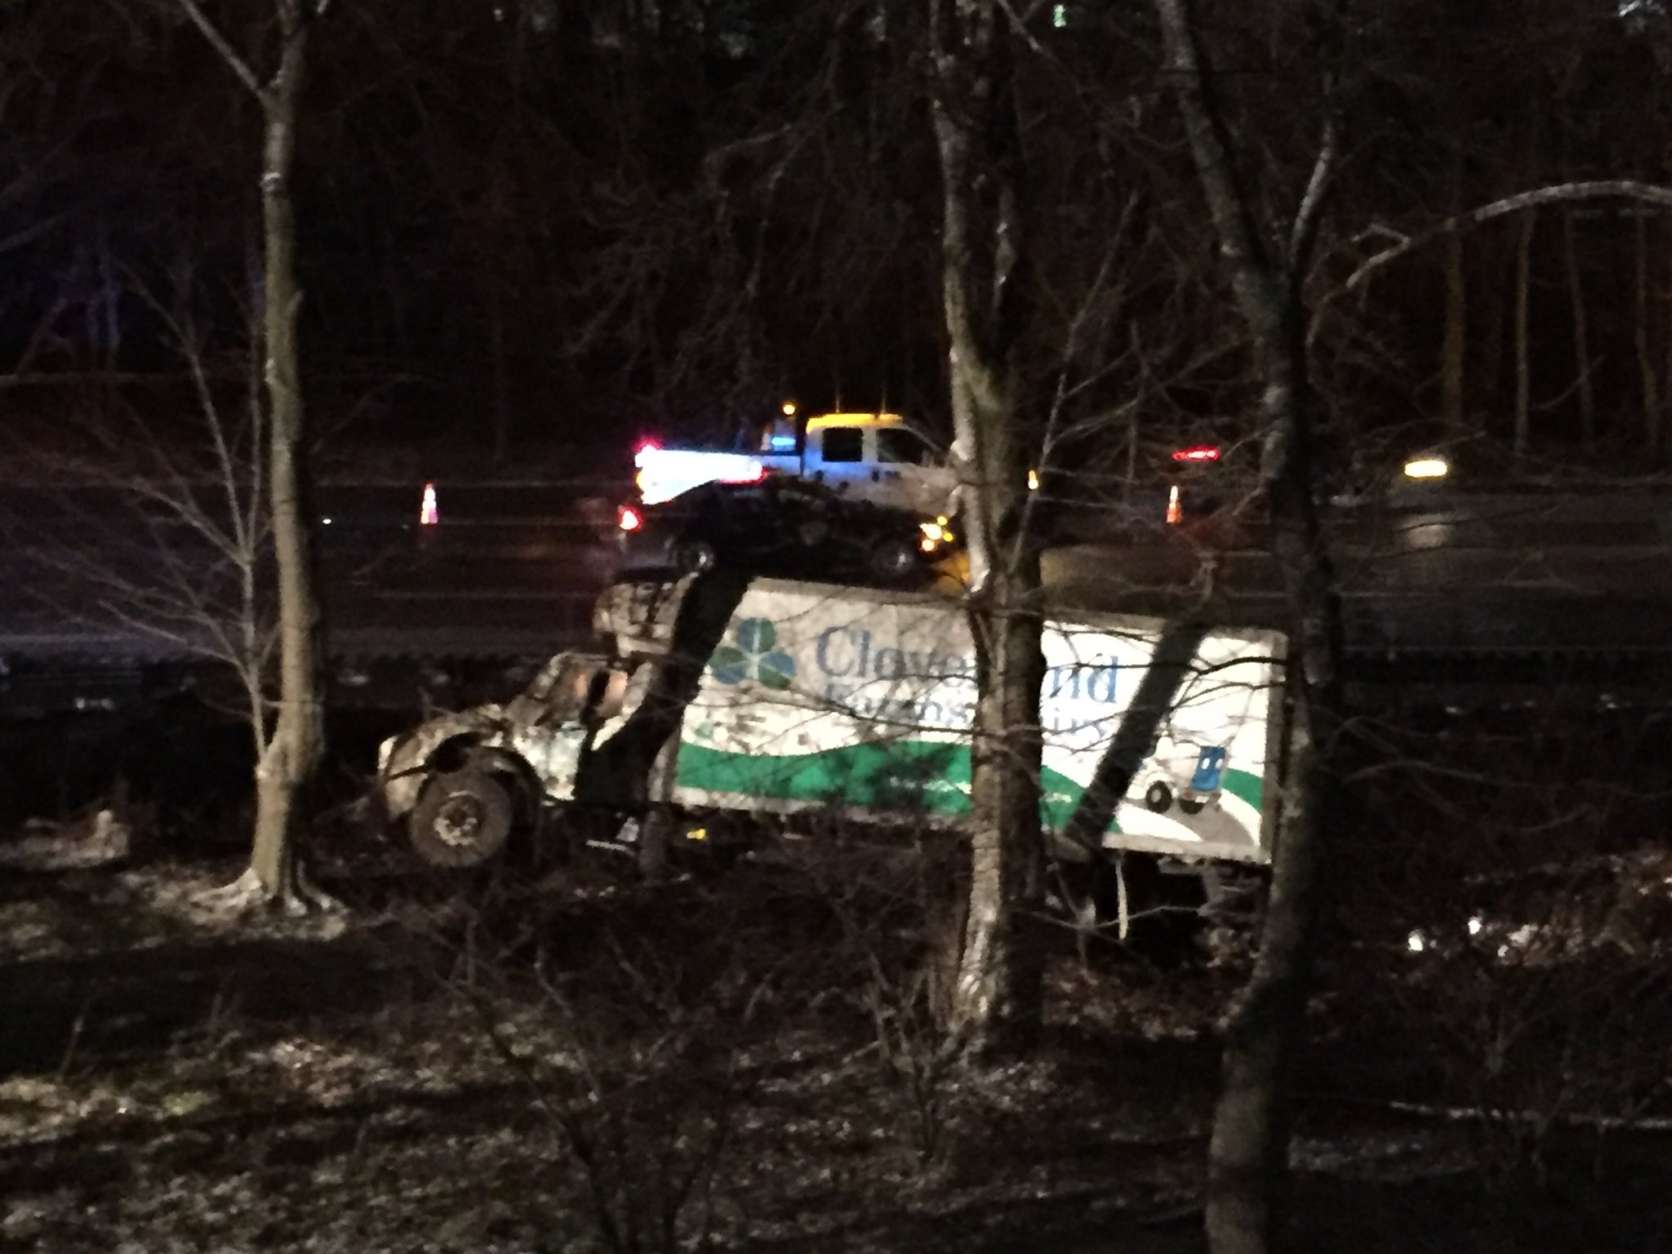 One of the two trucks that crashed on I-95 in Howard County early Friday. (WTOP/Dennis Foley)